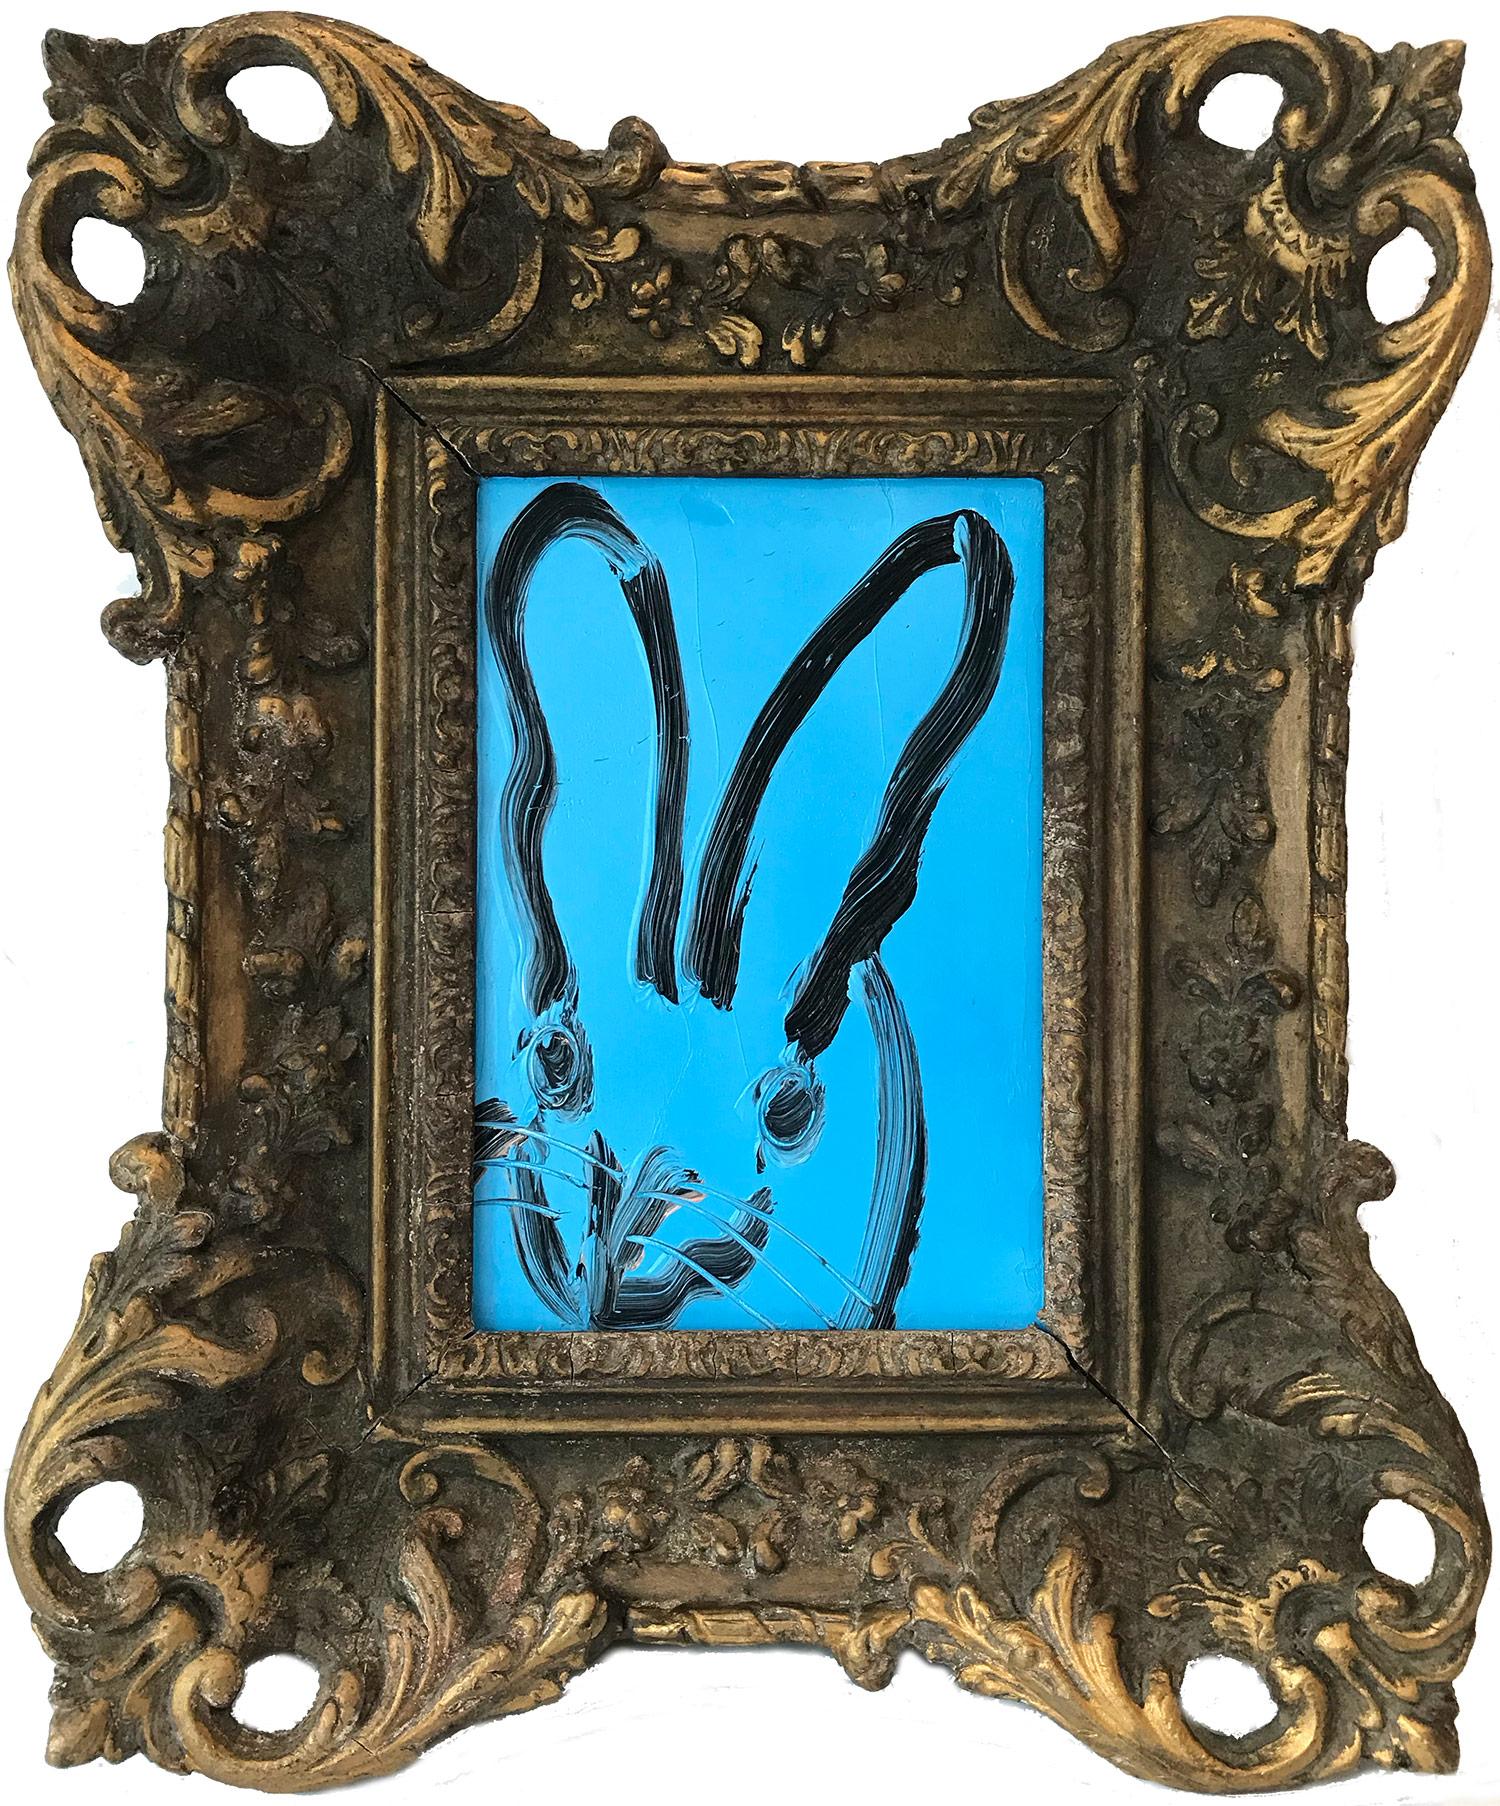 Hunt Slonem Abstract Painting - "Blue Bonnet"  (Black Outlined Bunny on Periwinkle Blue)